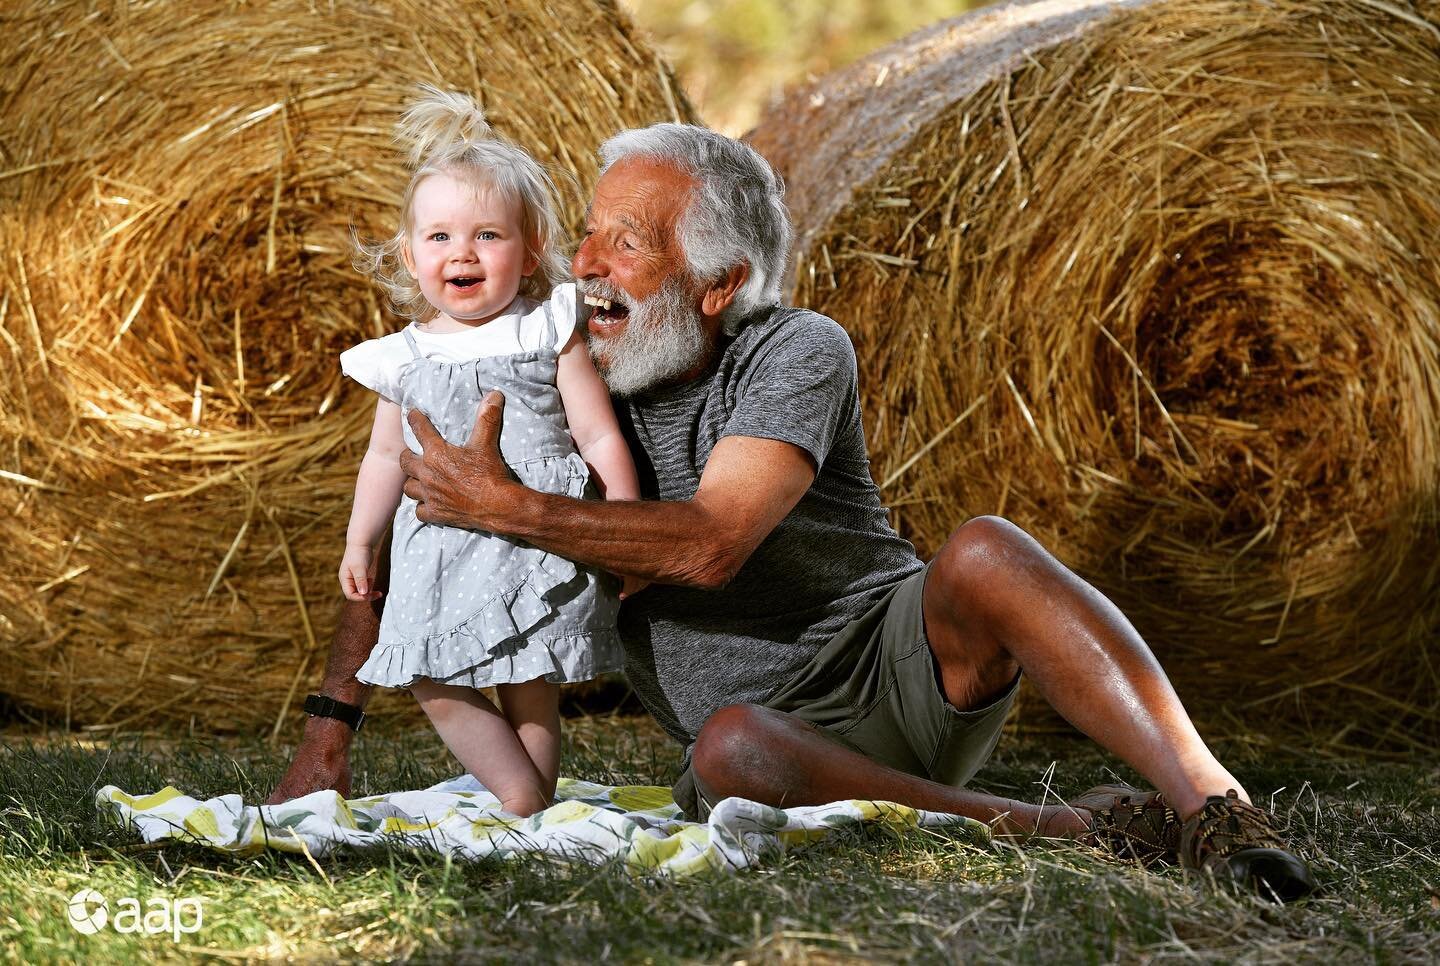 Unlucky stroke has 87 yo Ken paddling for Islay - 2400 km along the Murray to raise funds for a rare skin condition, EB, which his great-granddaughter has. #aap #Advertiser #epidermolysis #EB #Debra #kerynstevensphotography www.kerynstevens.com